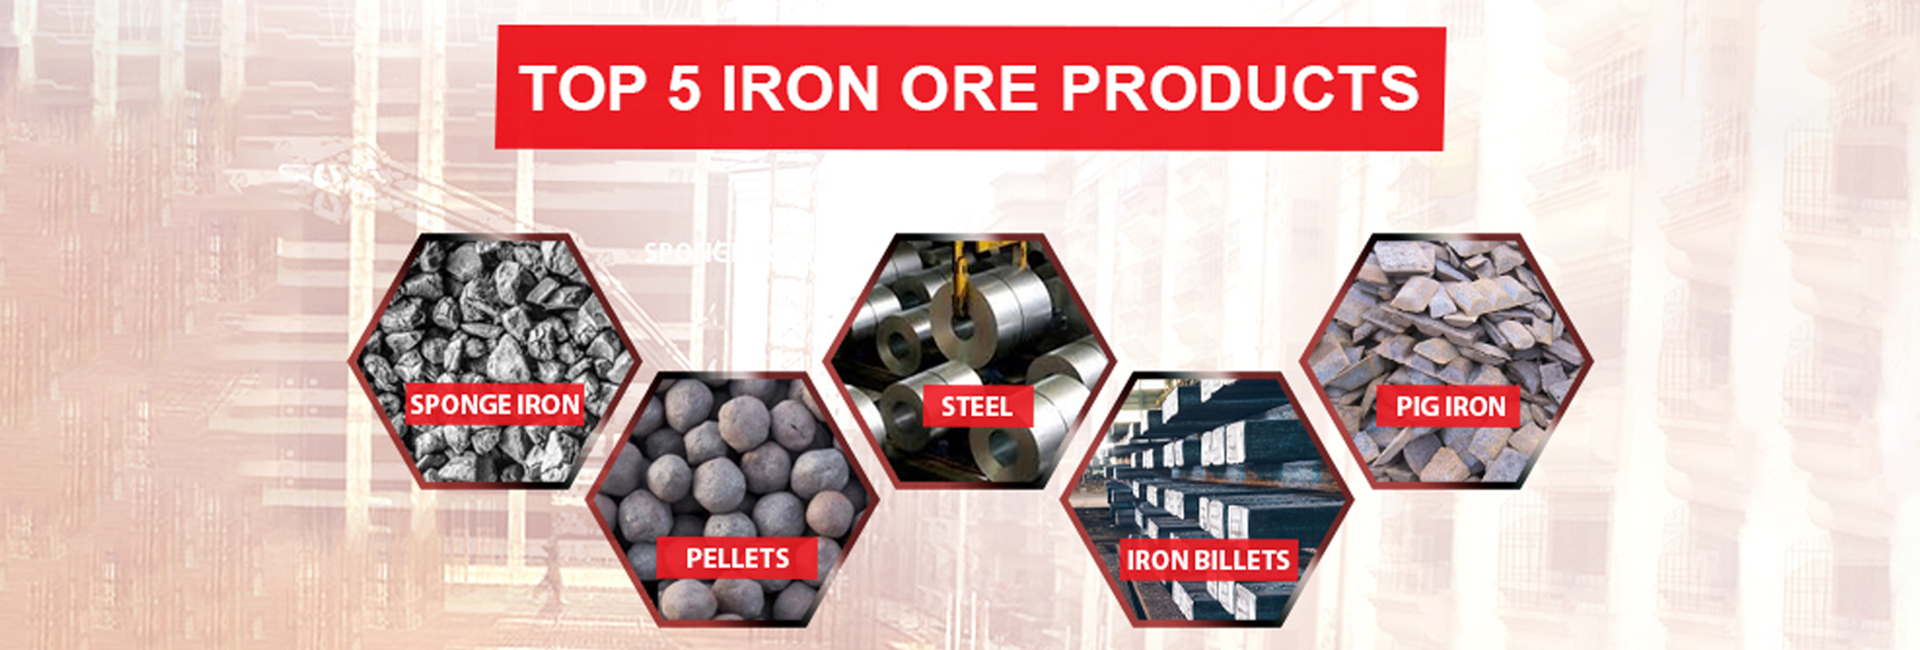 Top 5 iron ore products in India